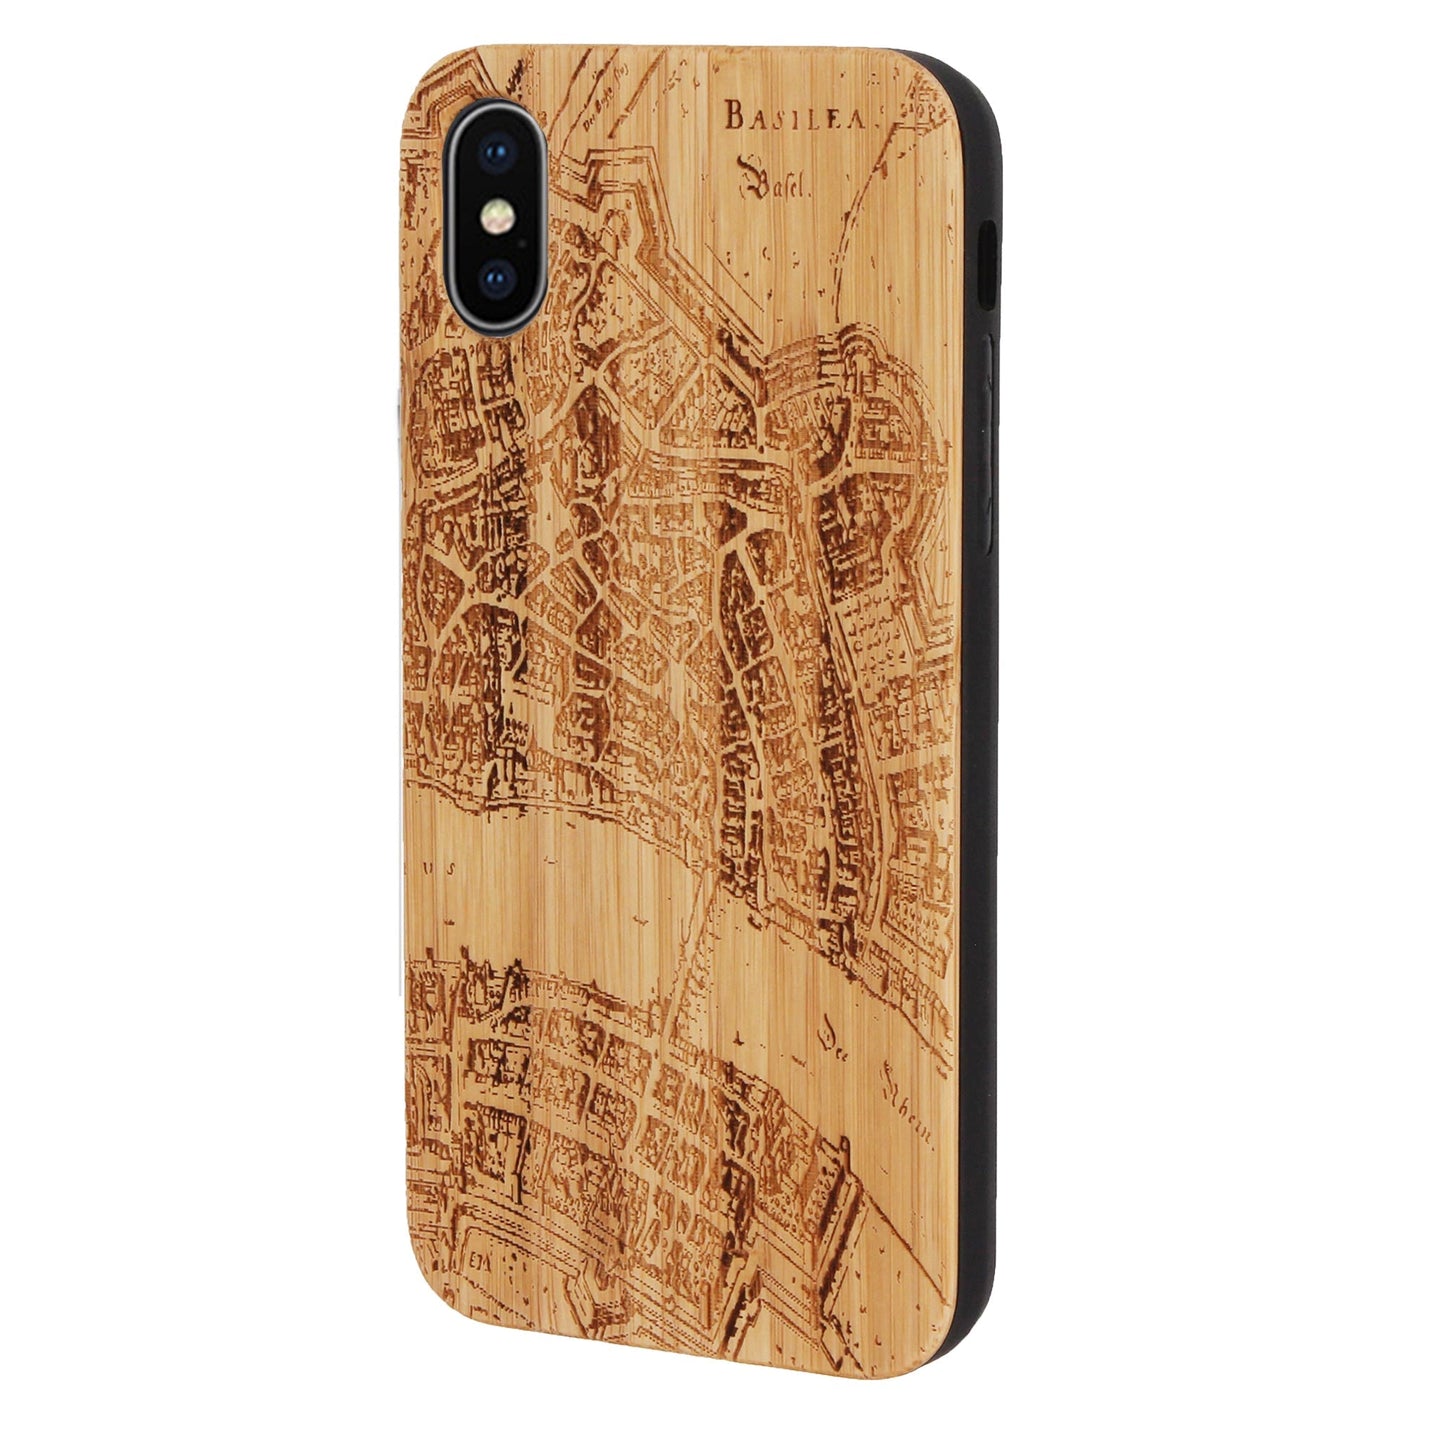 Basel Merian Eden Bamboo Case for iPhone XS Max